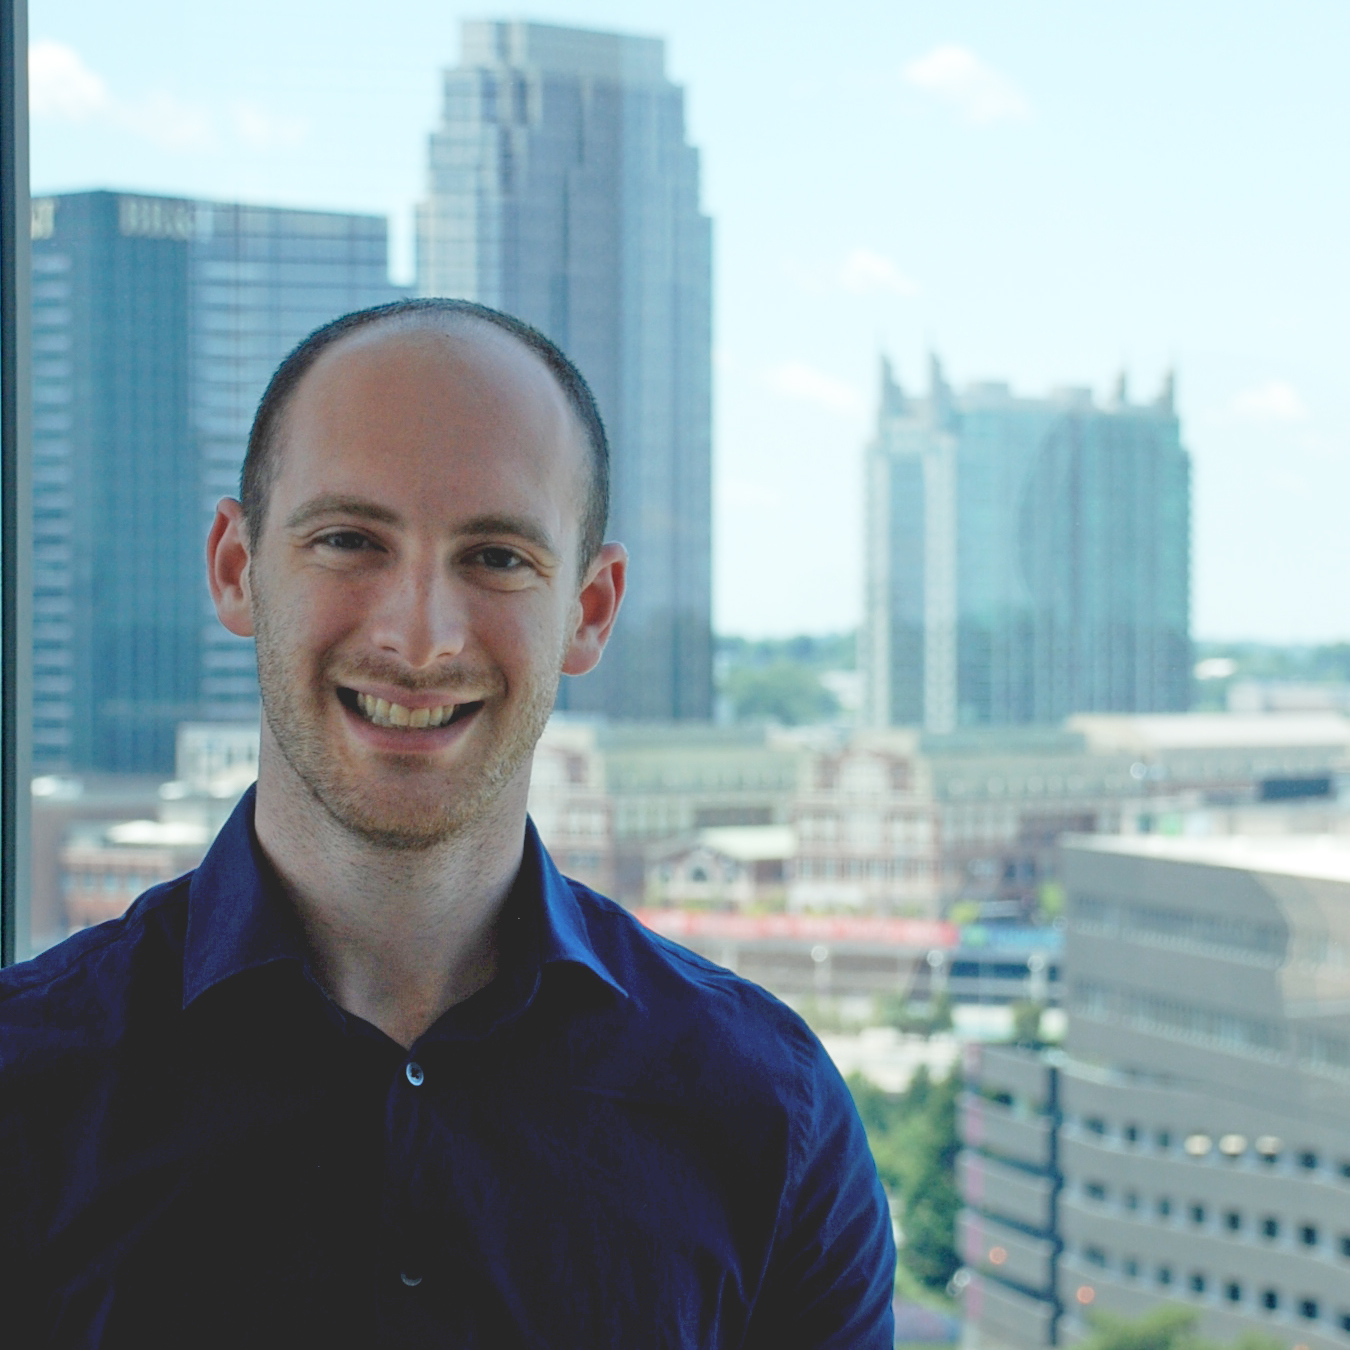 A hideous, ghastly headshot with the skyline of Atlantic Station in the background.